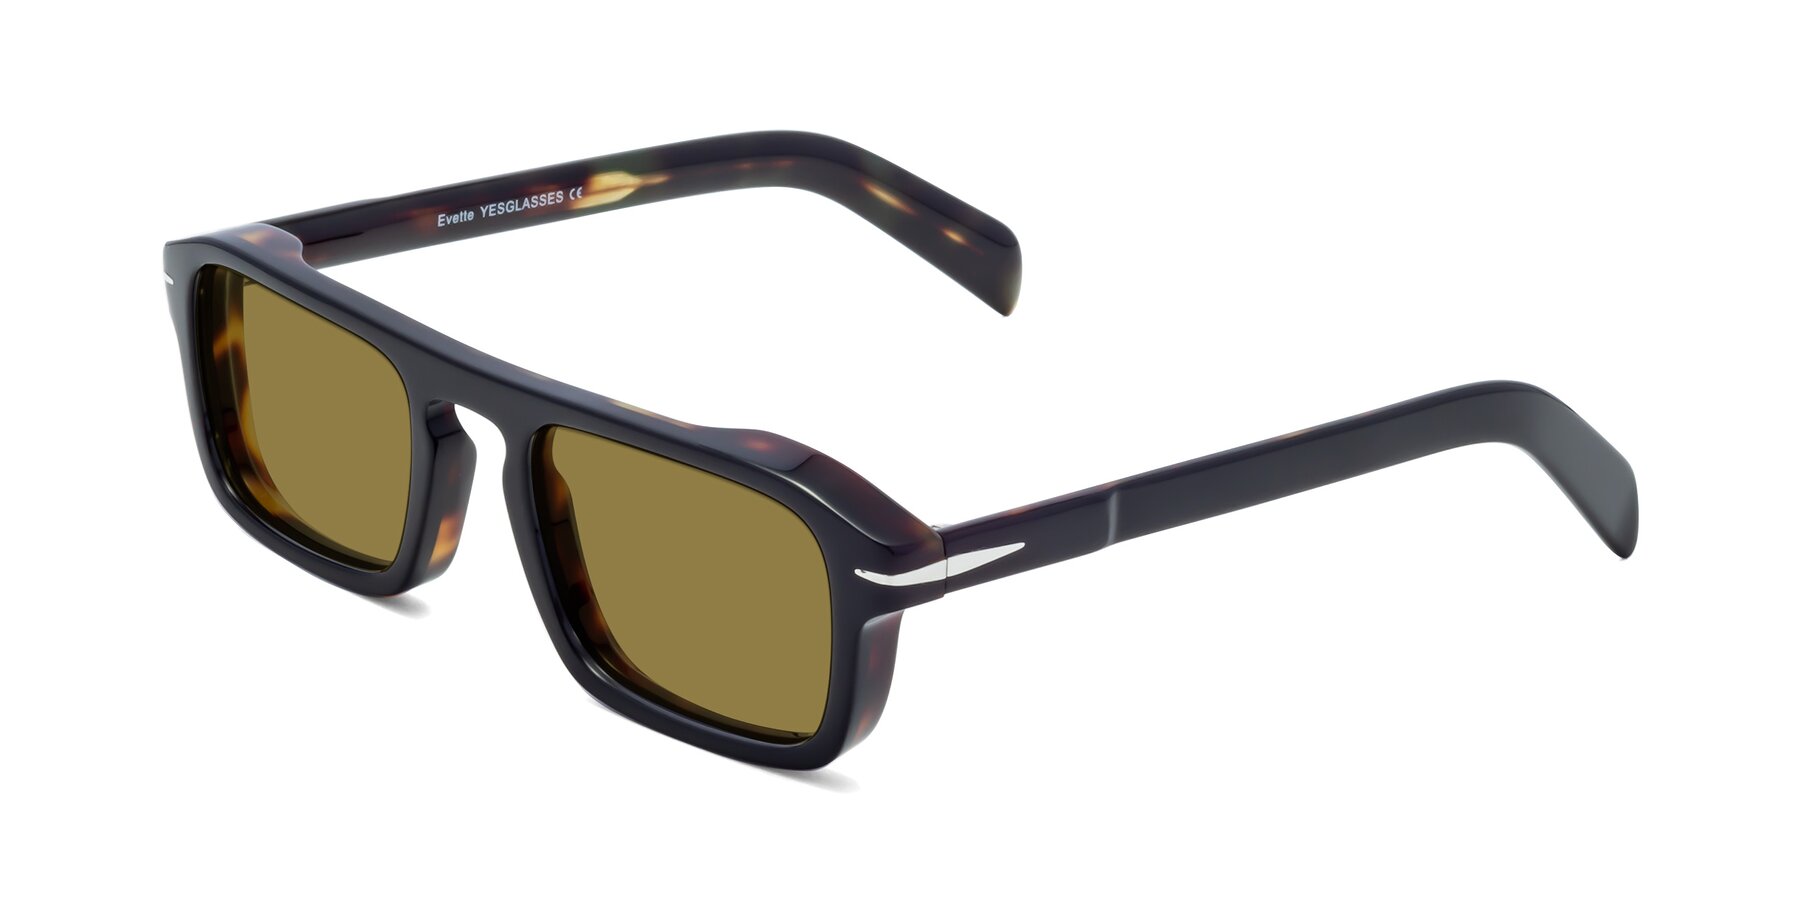 Angle of Evette in Black-Tortoise with Brown Polarized Lenses